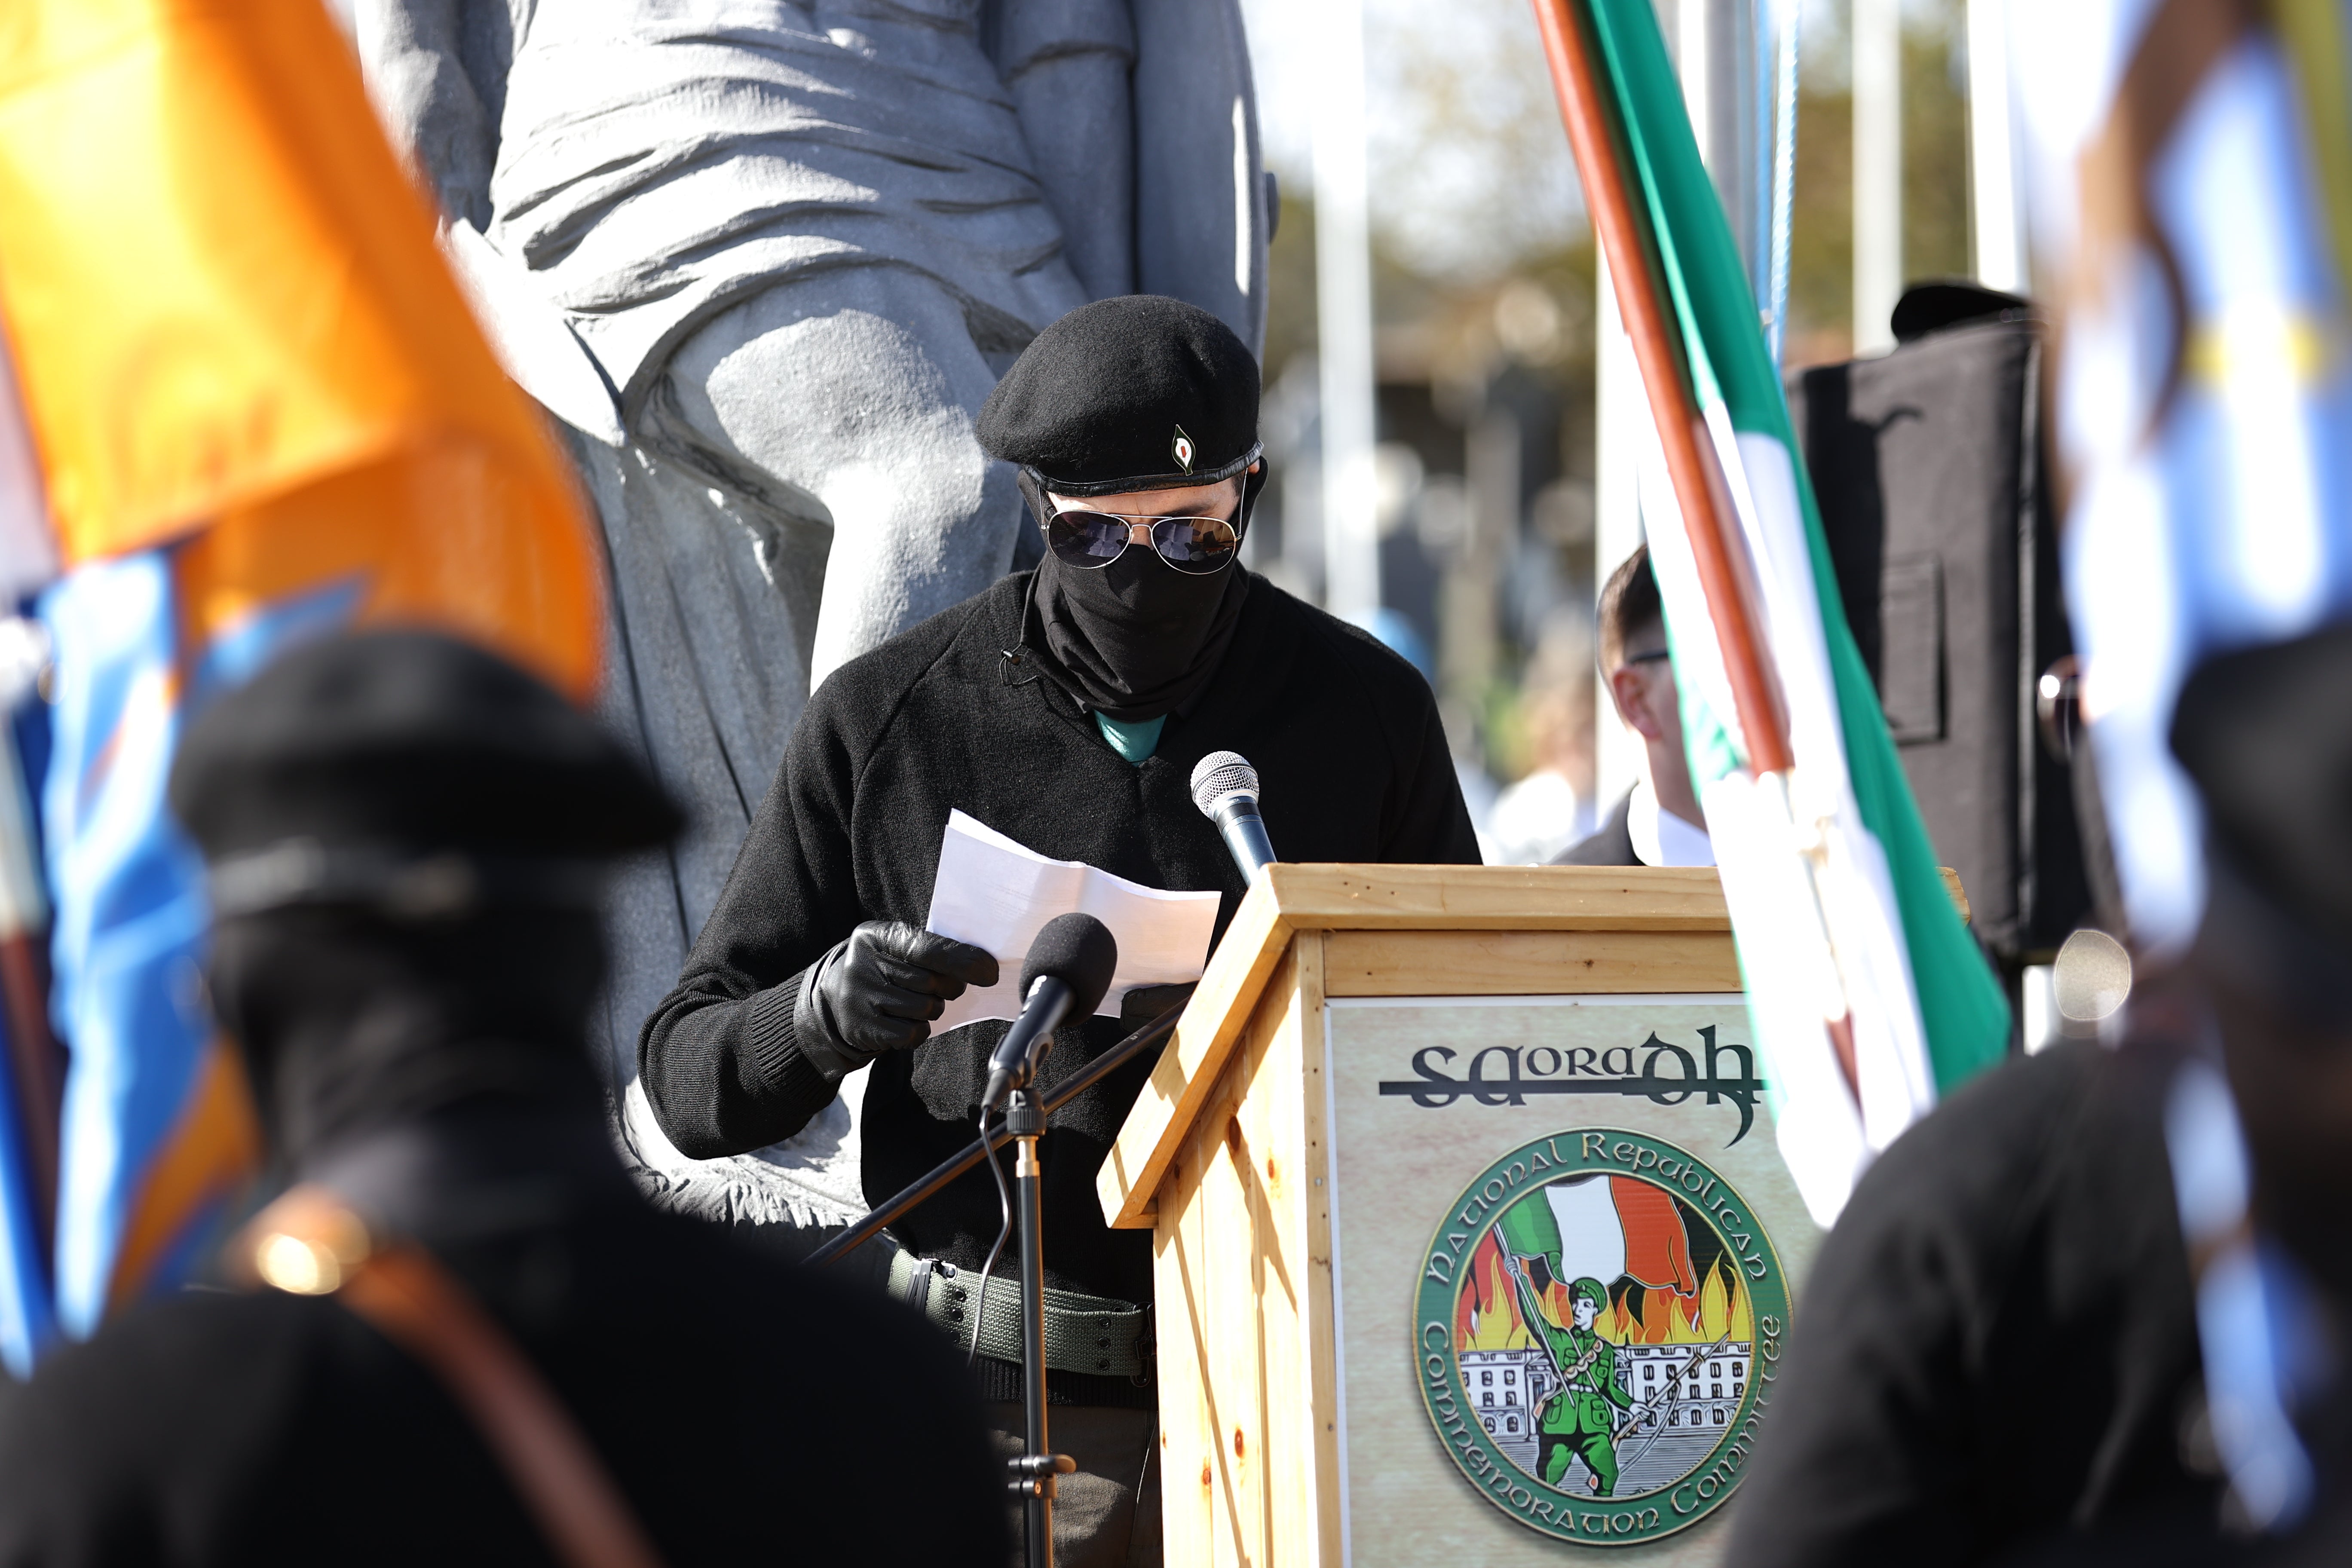 An Saoradh Colour Party member speaking at the City Cemetery in Londonderry (Liam McBurney/PA)